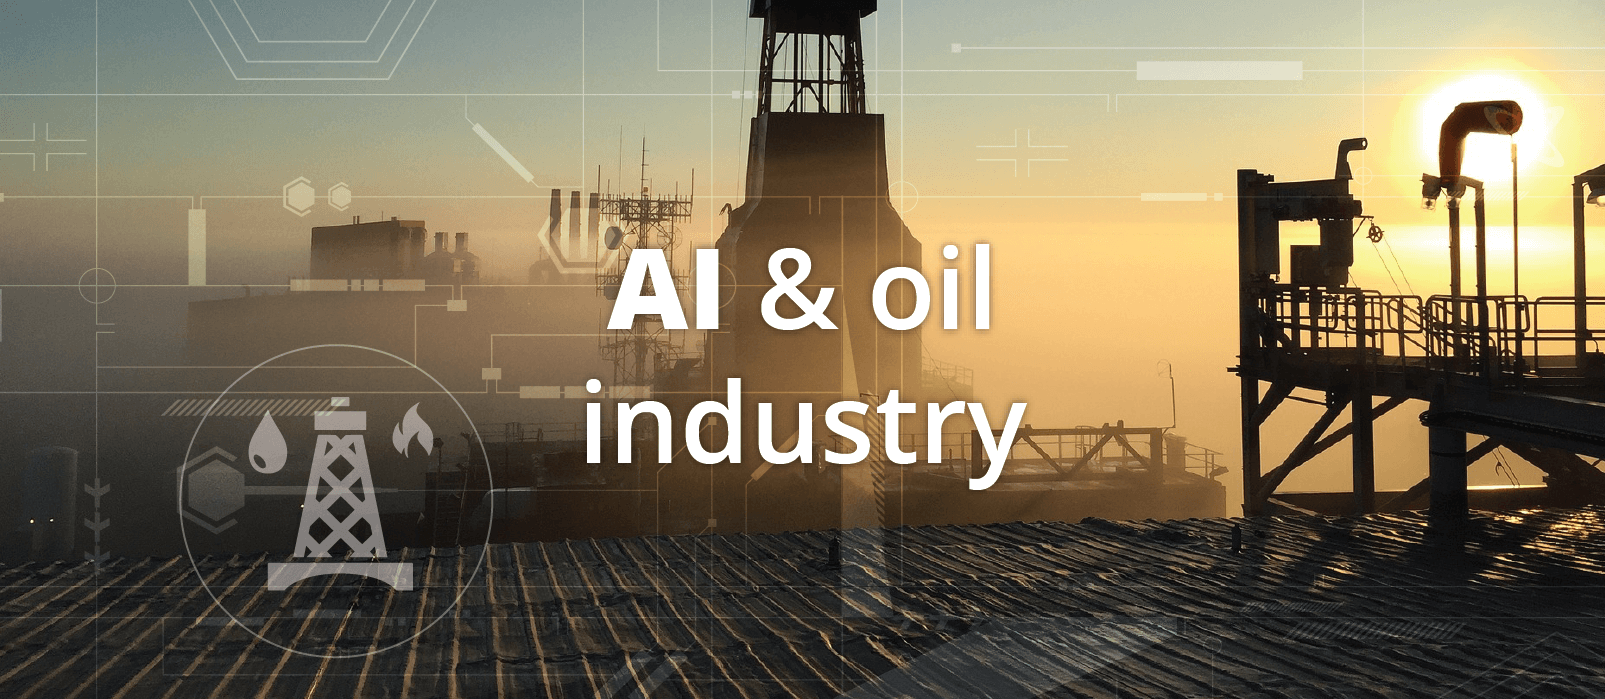 5.AI&oil_industry-12-1.png